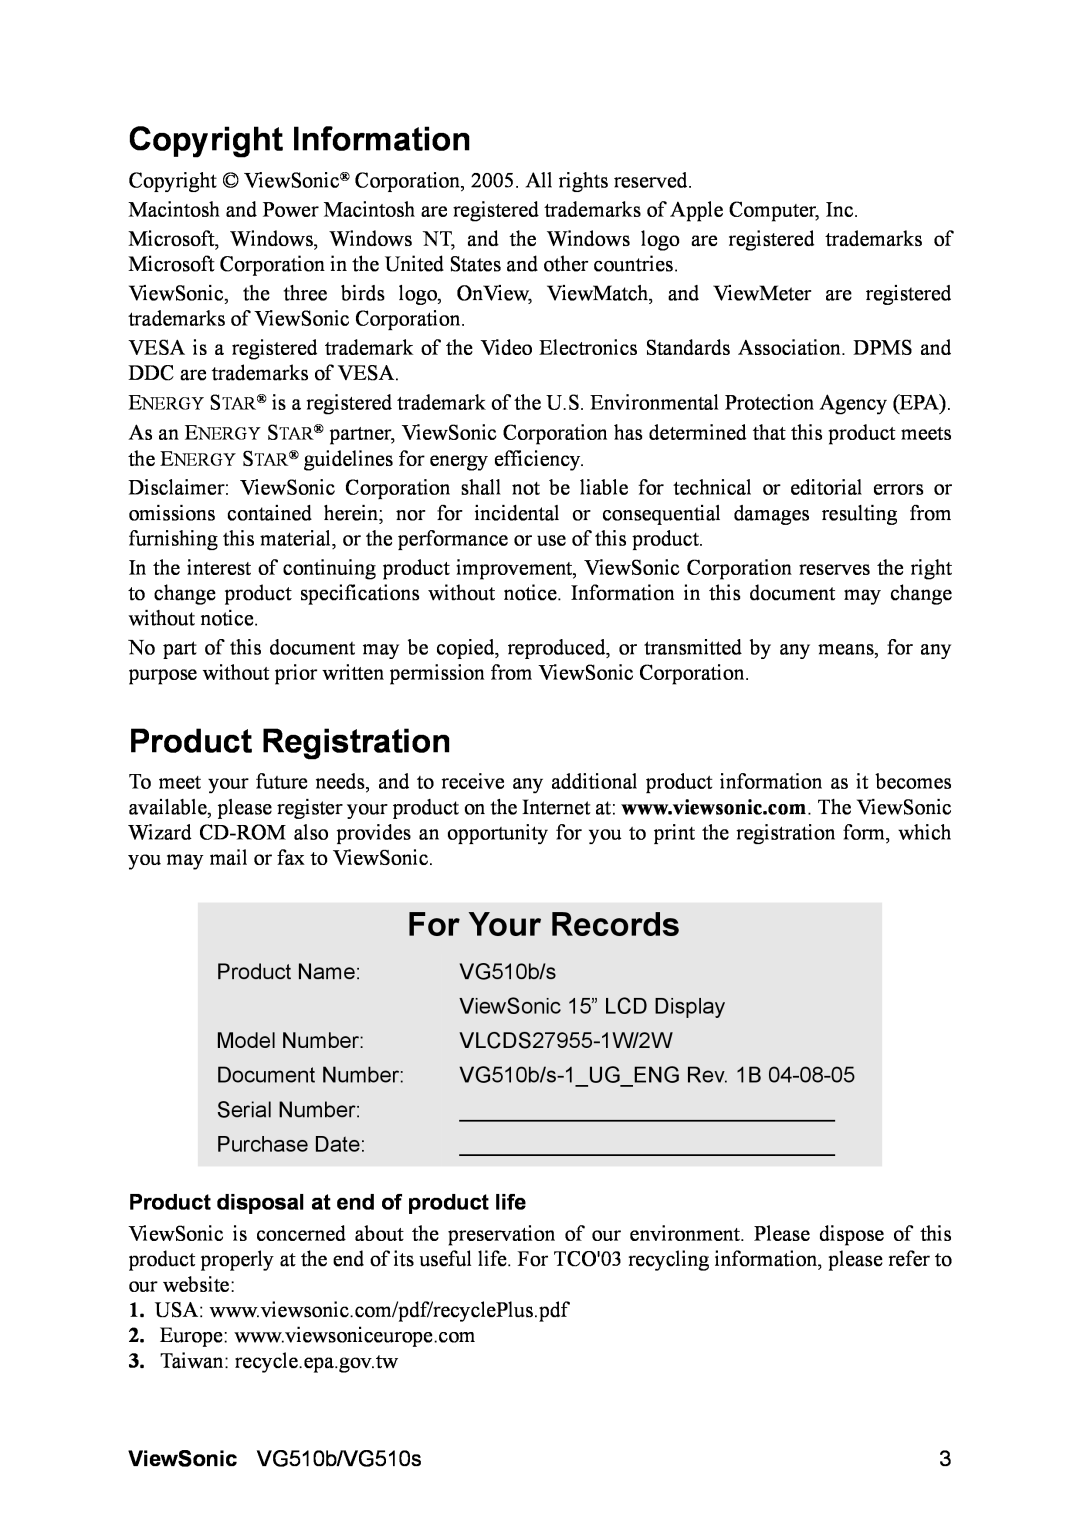 ViewSonic VG510b-1 Copyright Information, Product Registration, For Your Records, Product disposal at end of product life 